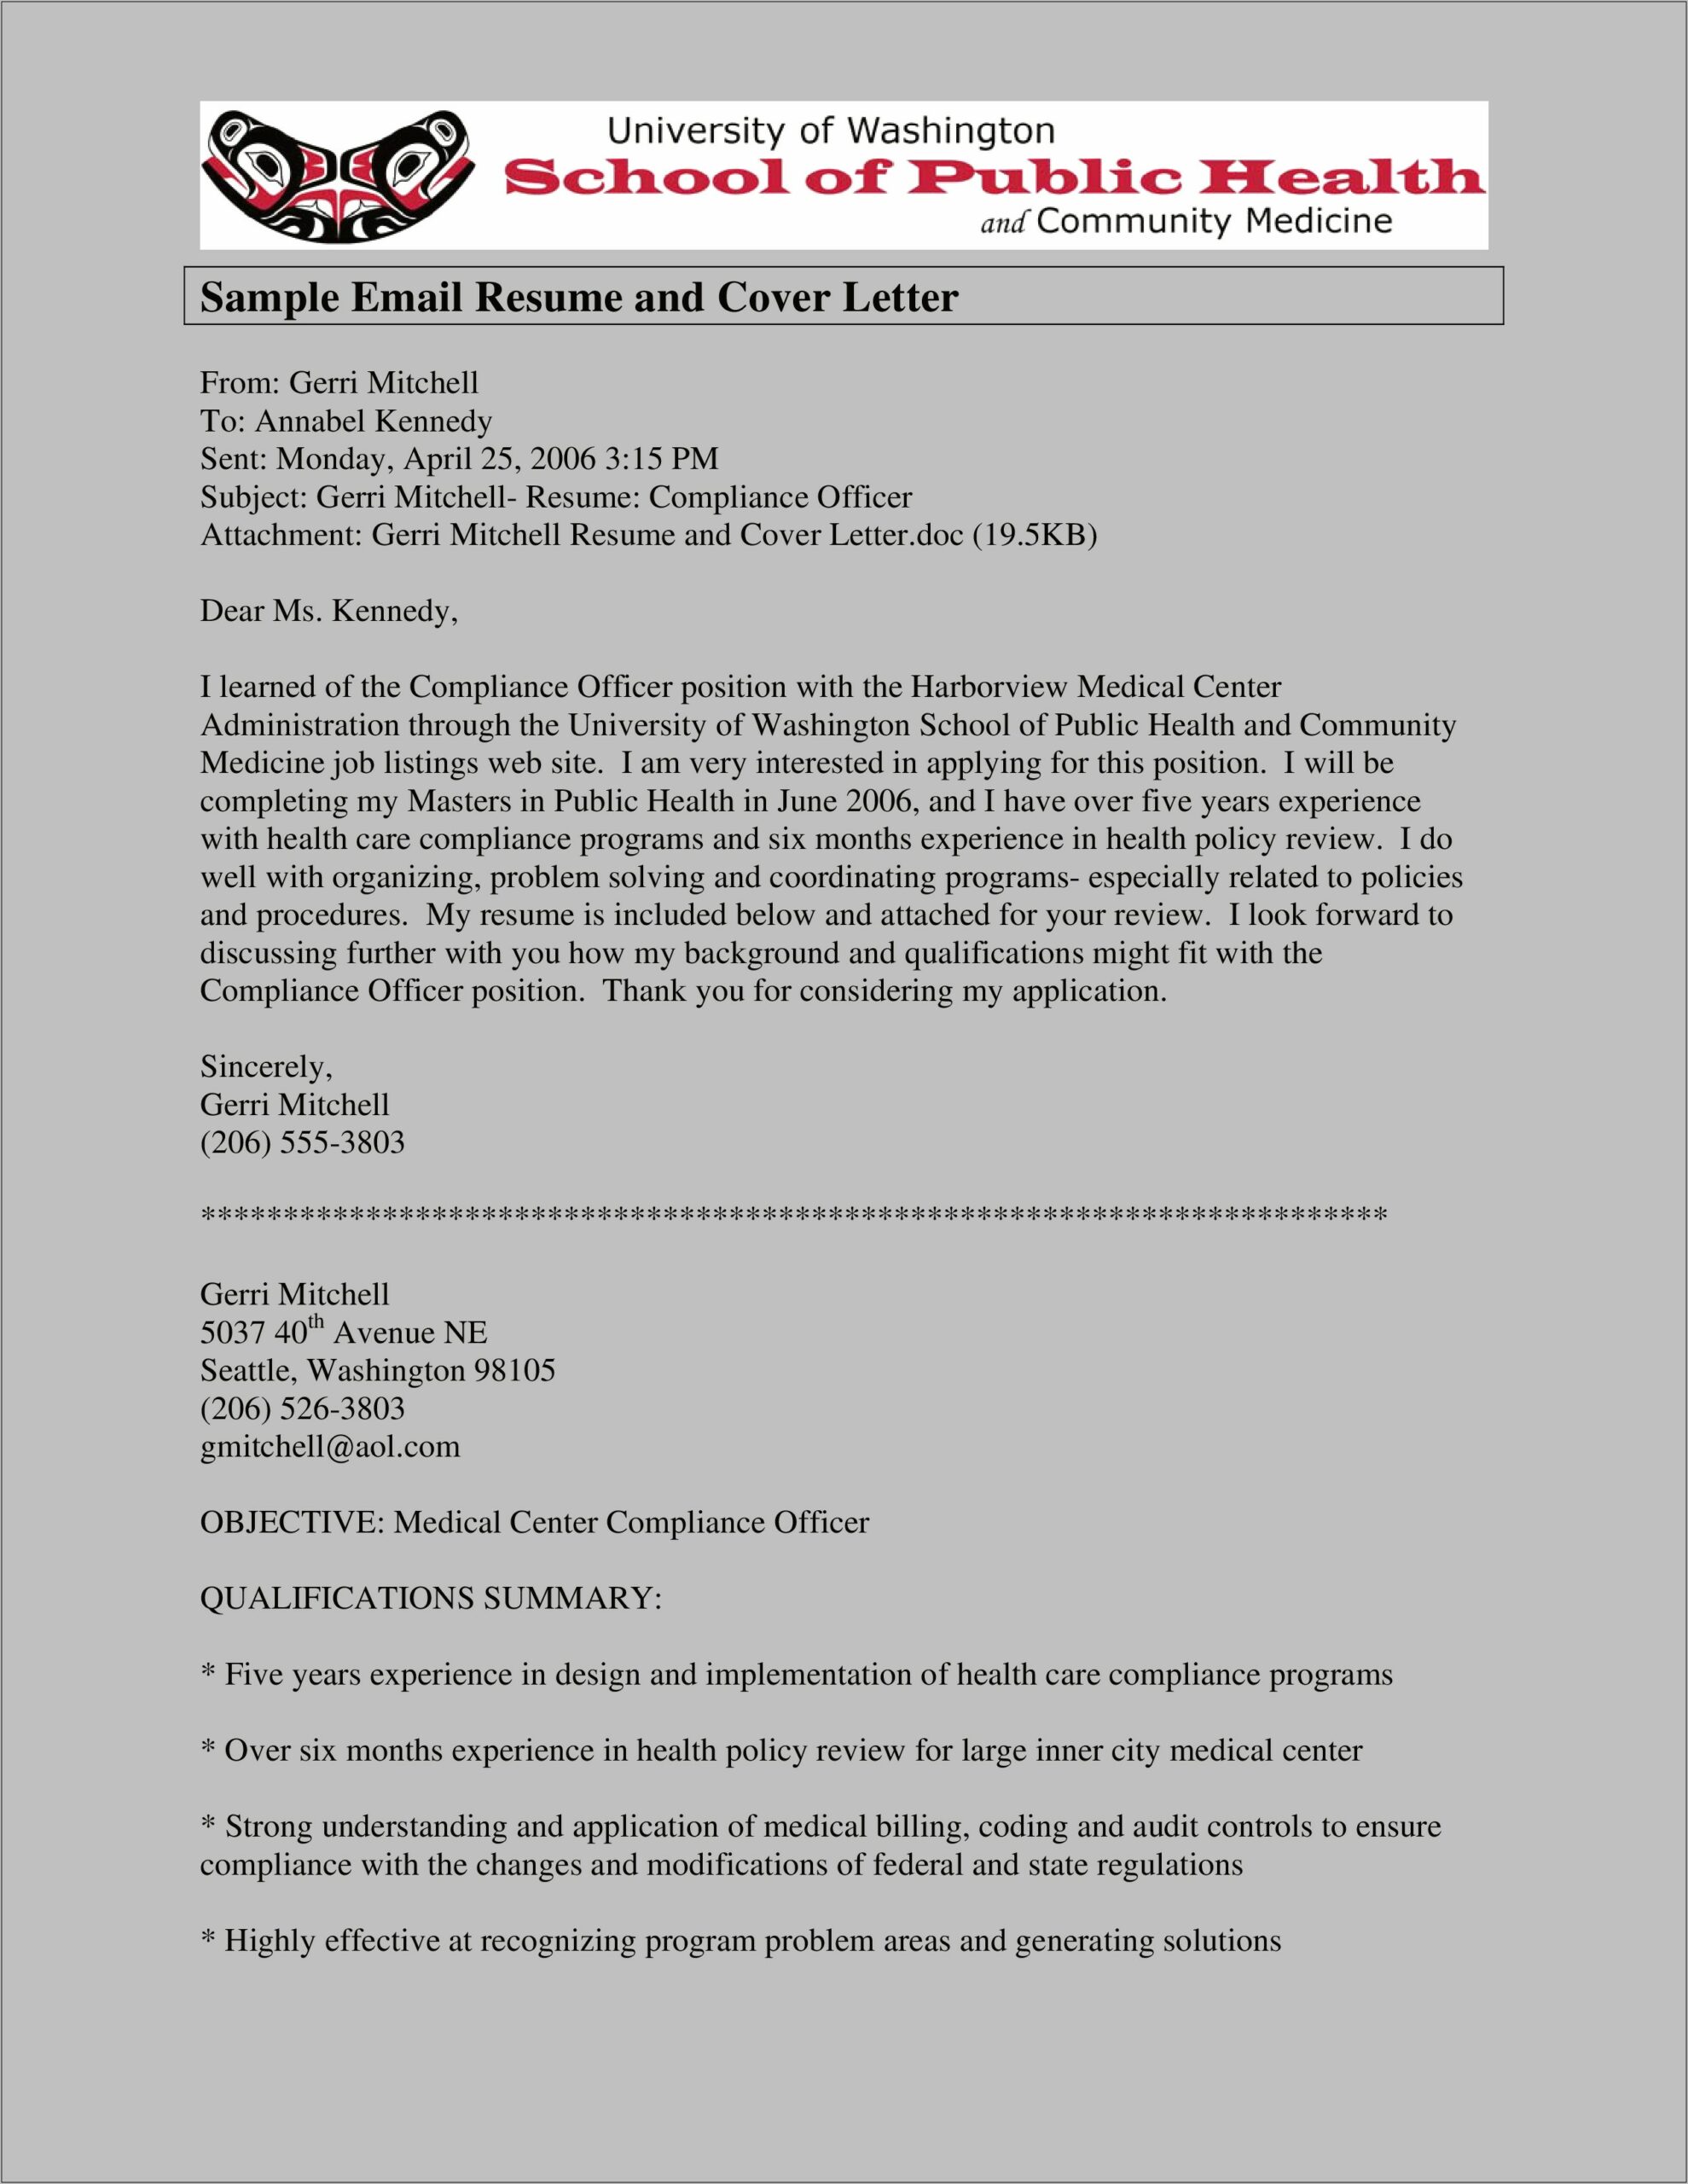 Sample Cover Letter And Resume Via Email